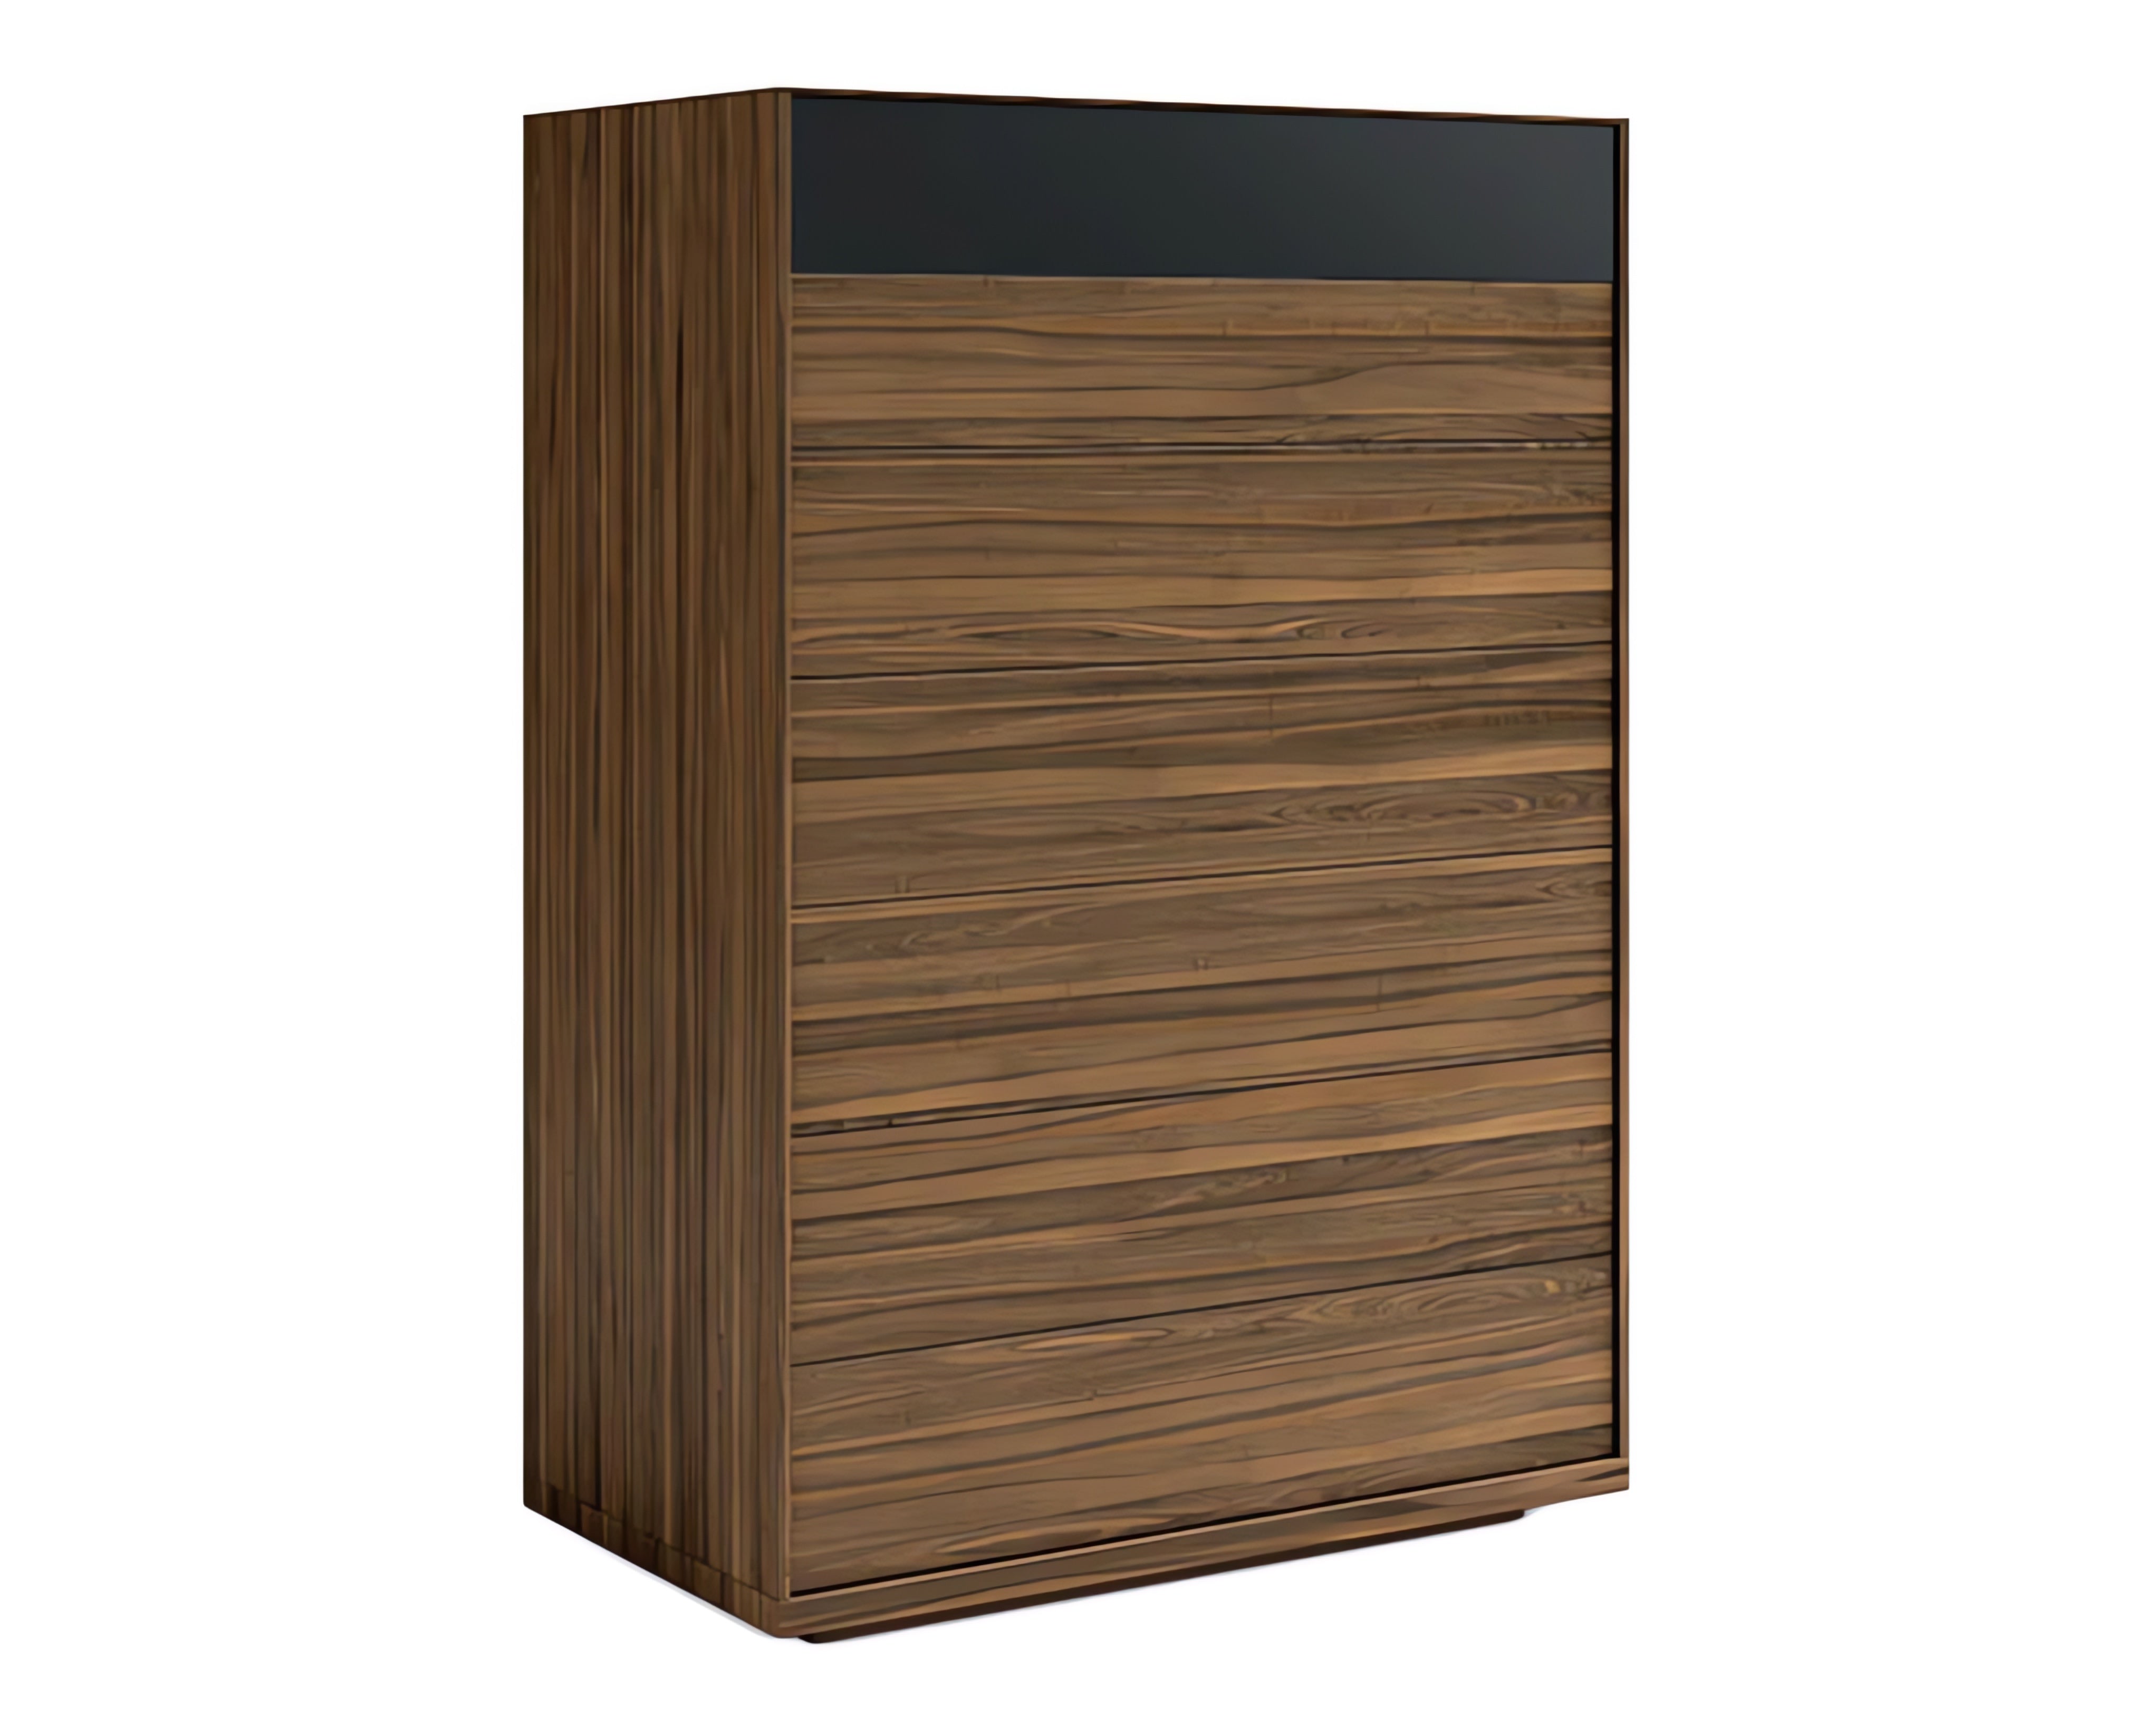 Smoked Walnut with Ebony Glass | Mobican Mimosa High Chest | Valley Ridge Furniture